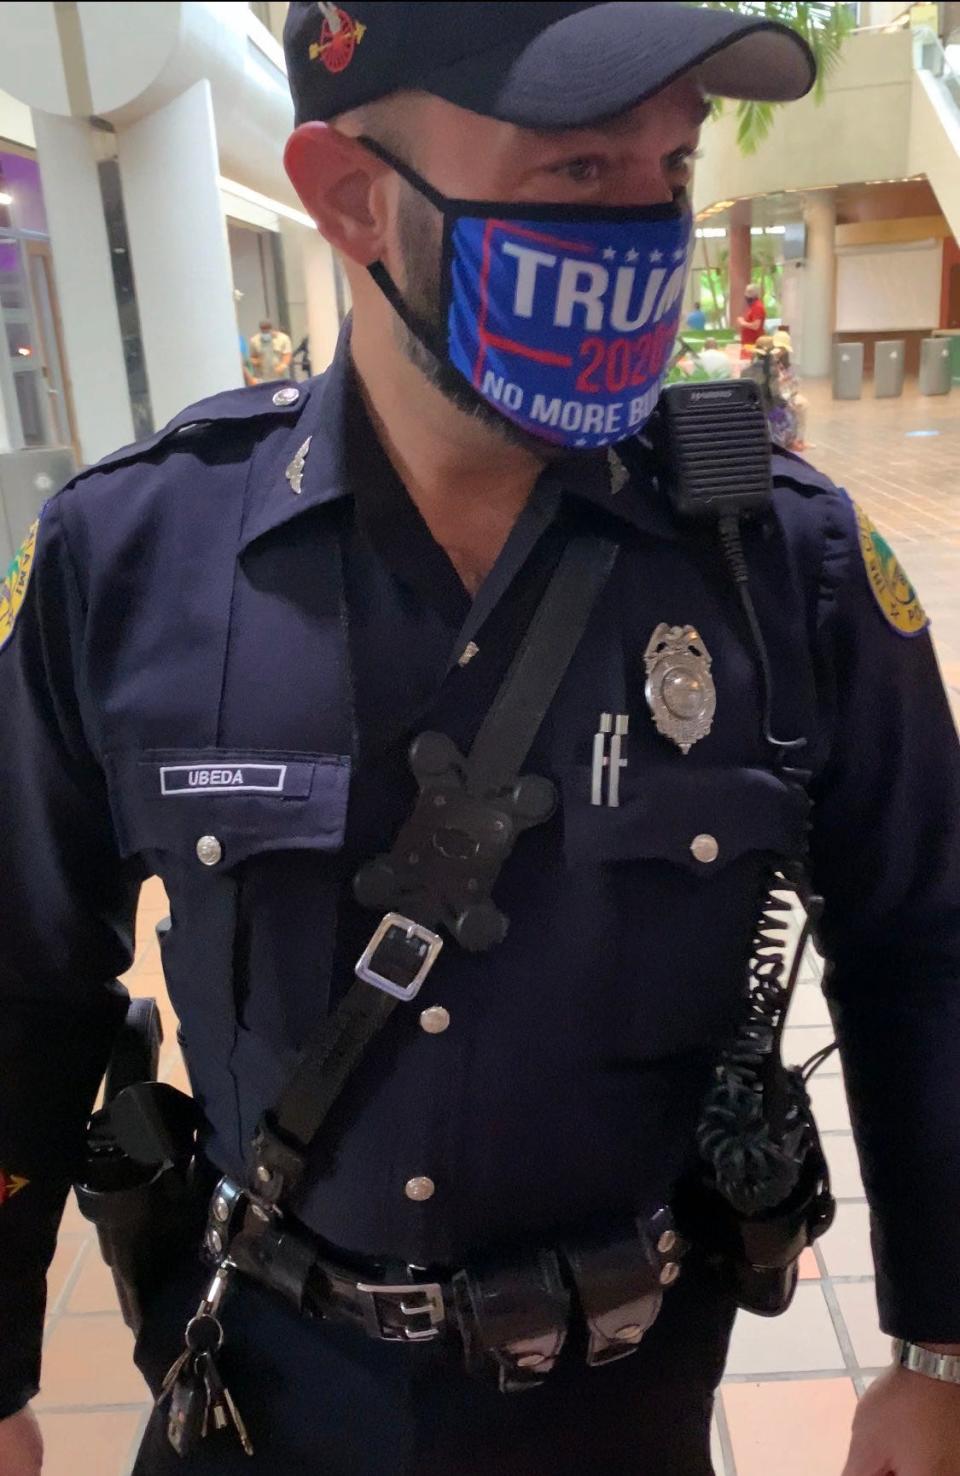 A Miami police officer spotted at Government Center and wearing a pro-Trump mask will be disciplined, Miami Police Chief Jorge Colina said Tuesday.